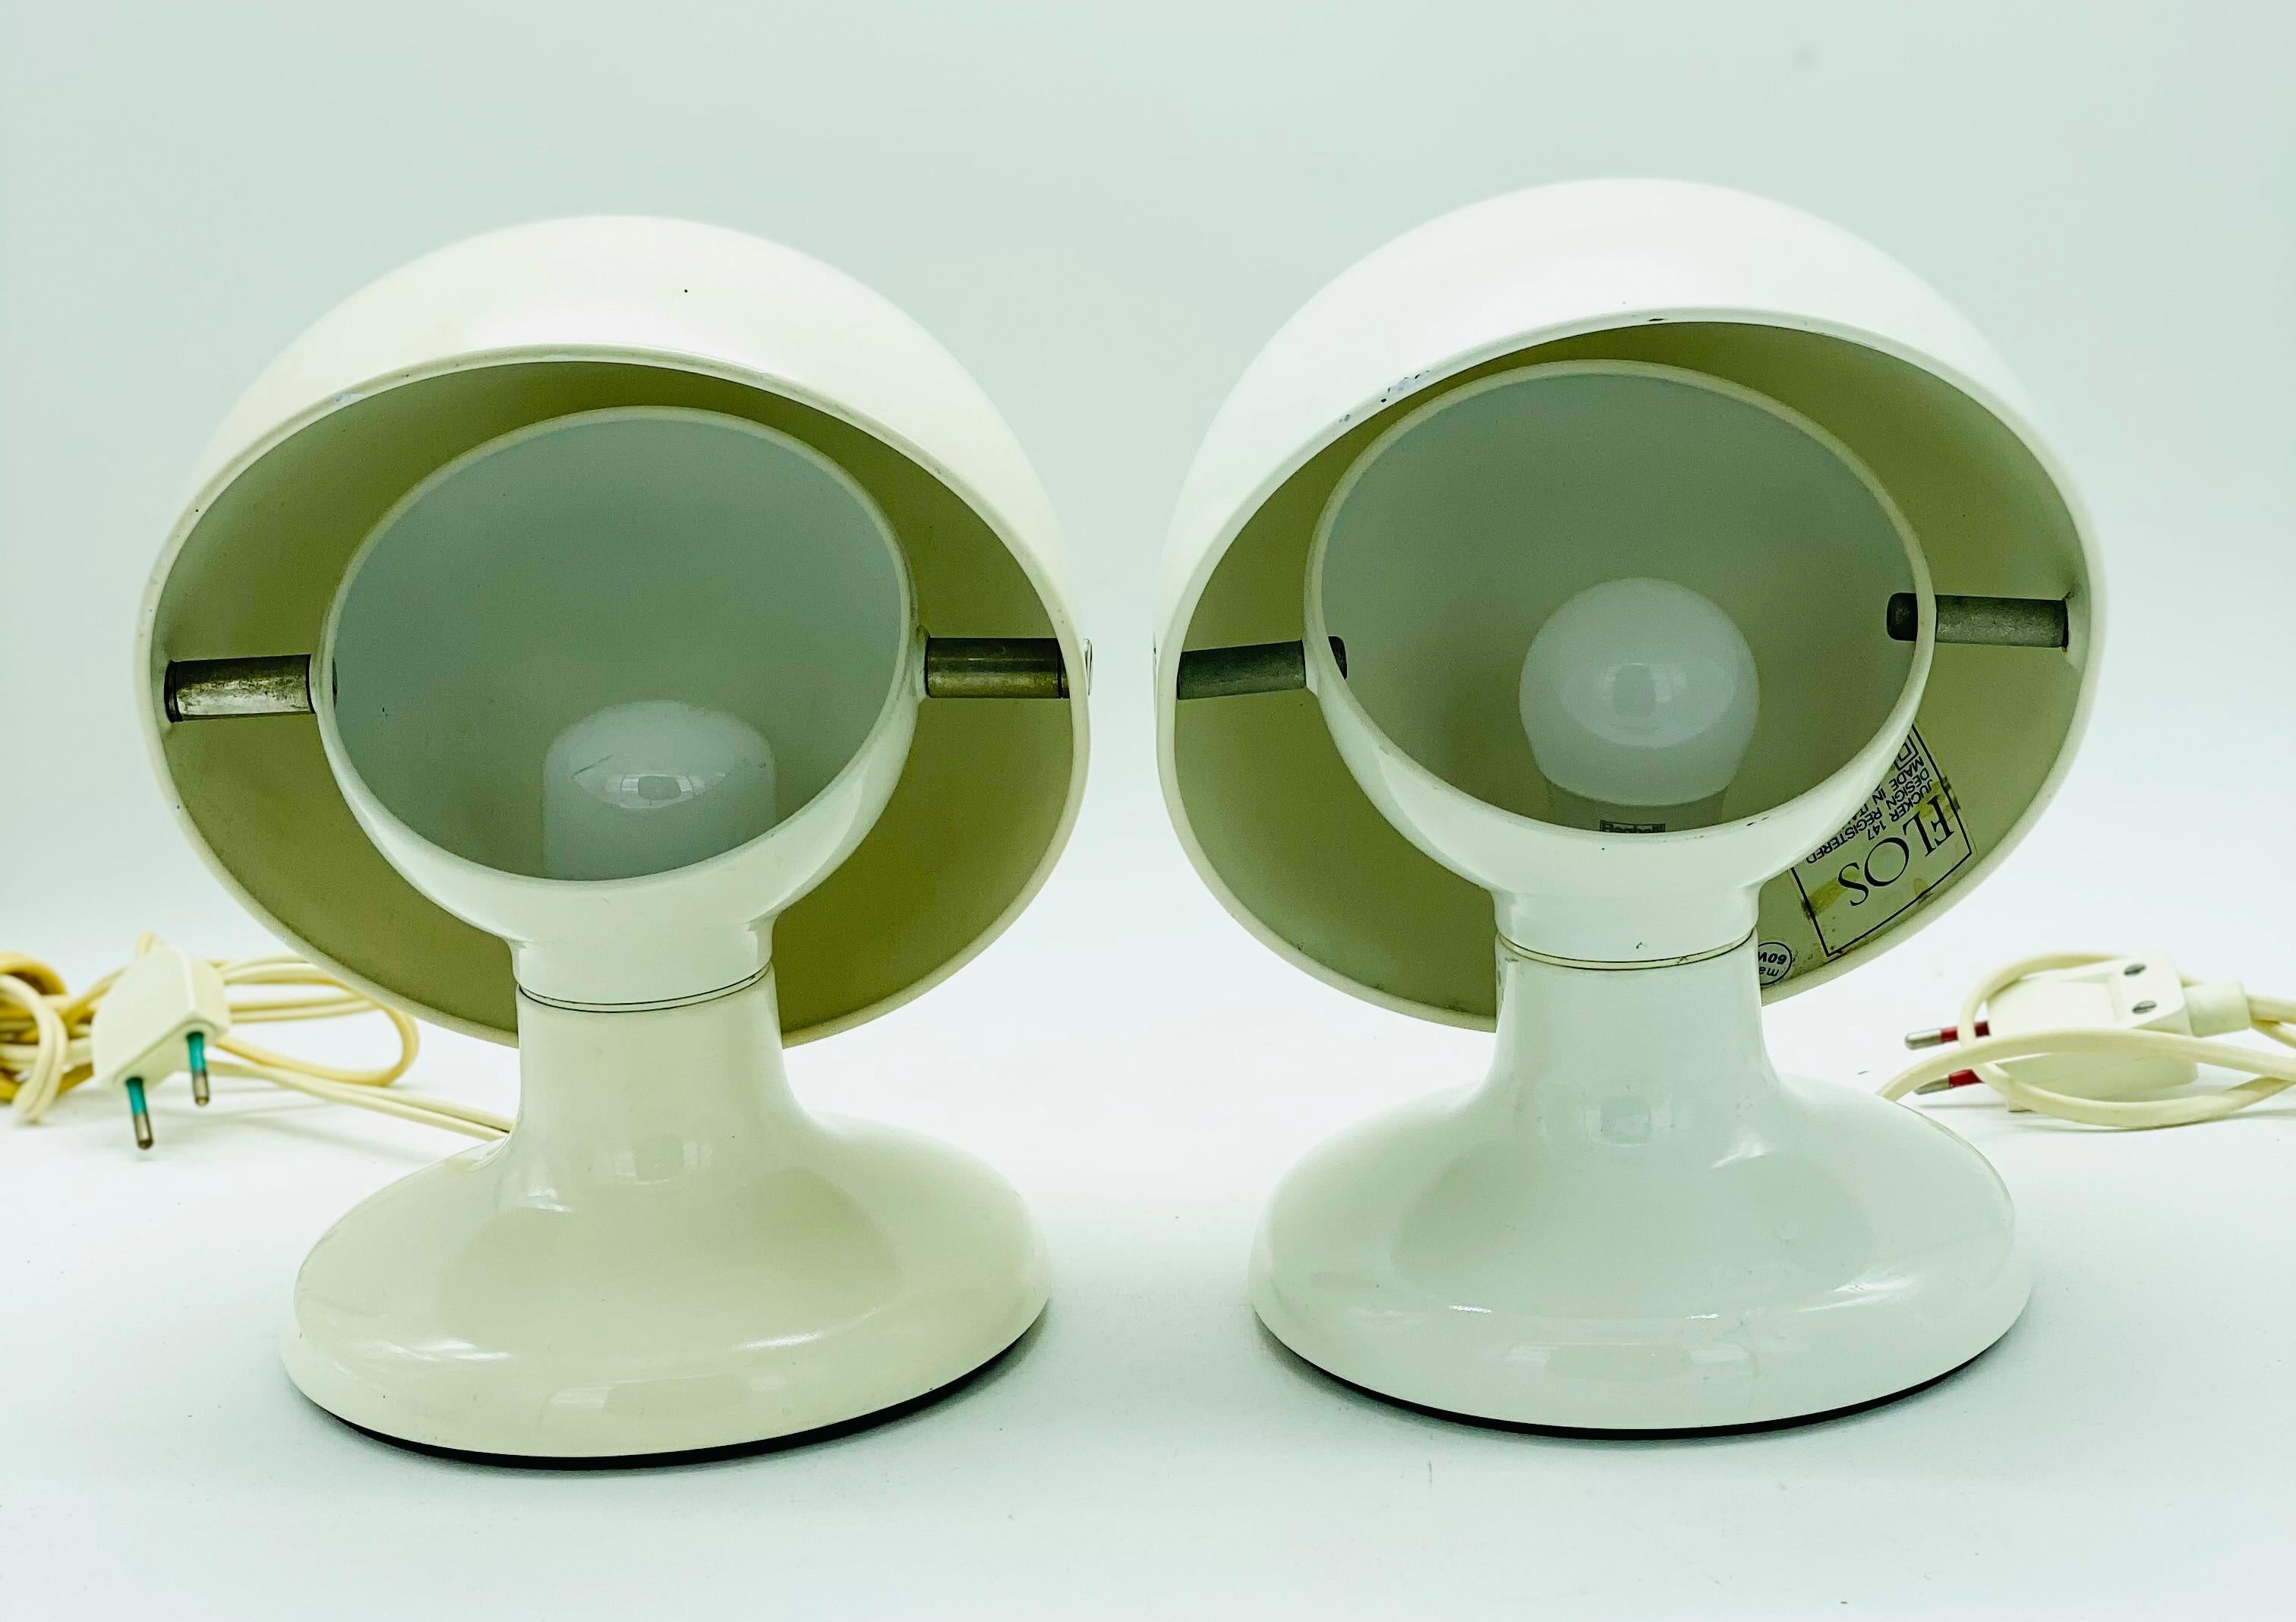 Mid-Century Modern Afra & Tobia Scarpa Jucker Table Lamps, Italy, 1960s